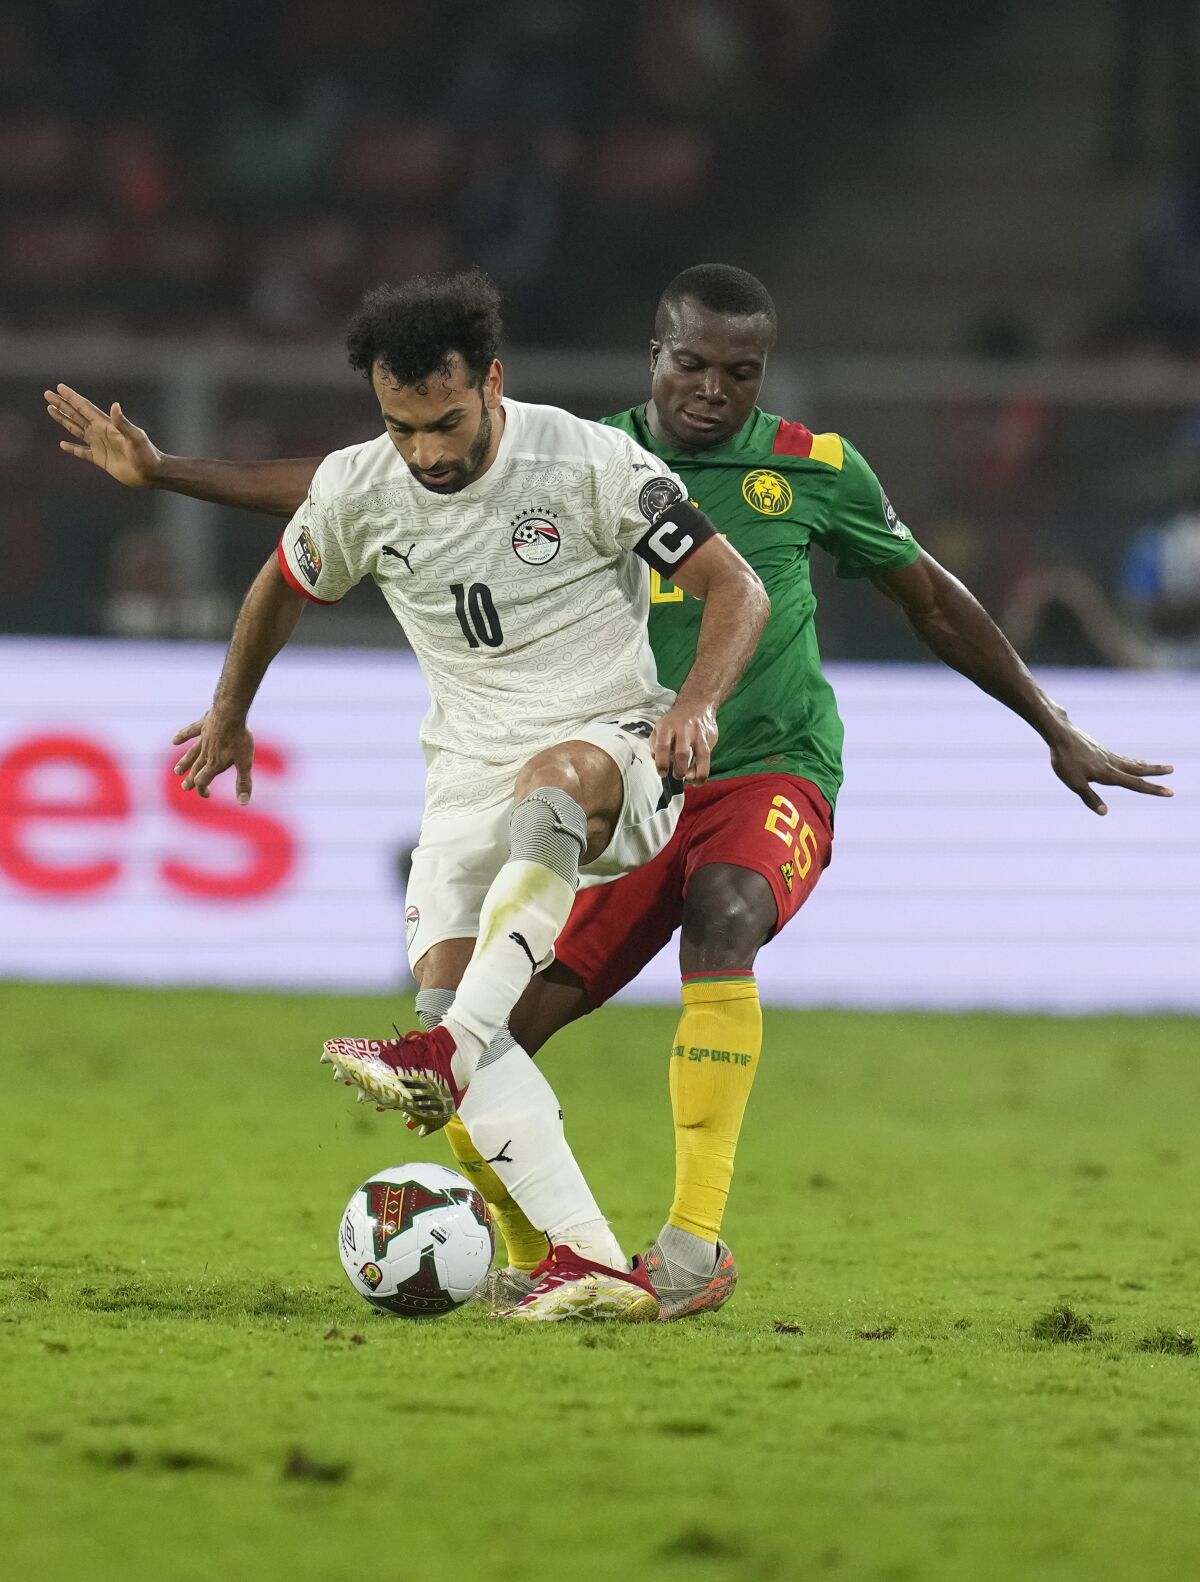 Egypt's Mohamed Salah, left, is challenged by Cameroon's Nouhou Tolo during the African Cup of Nations 2022 semi-final soccer match between Cameroon and Egypt at the Olembe stadium in Yaounde, Cameroon, Thursday, Feb. 3, 2022. (AP Photo/Themba Hadebe)